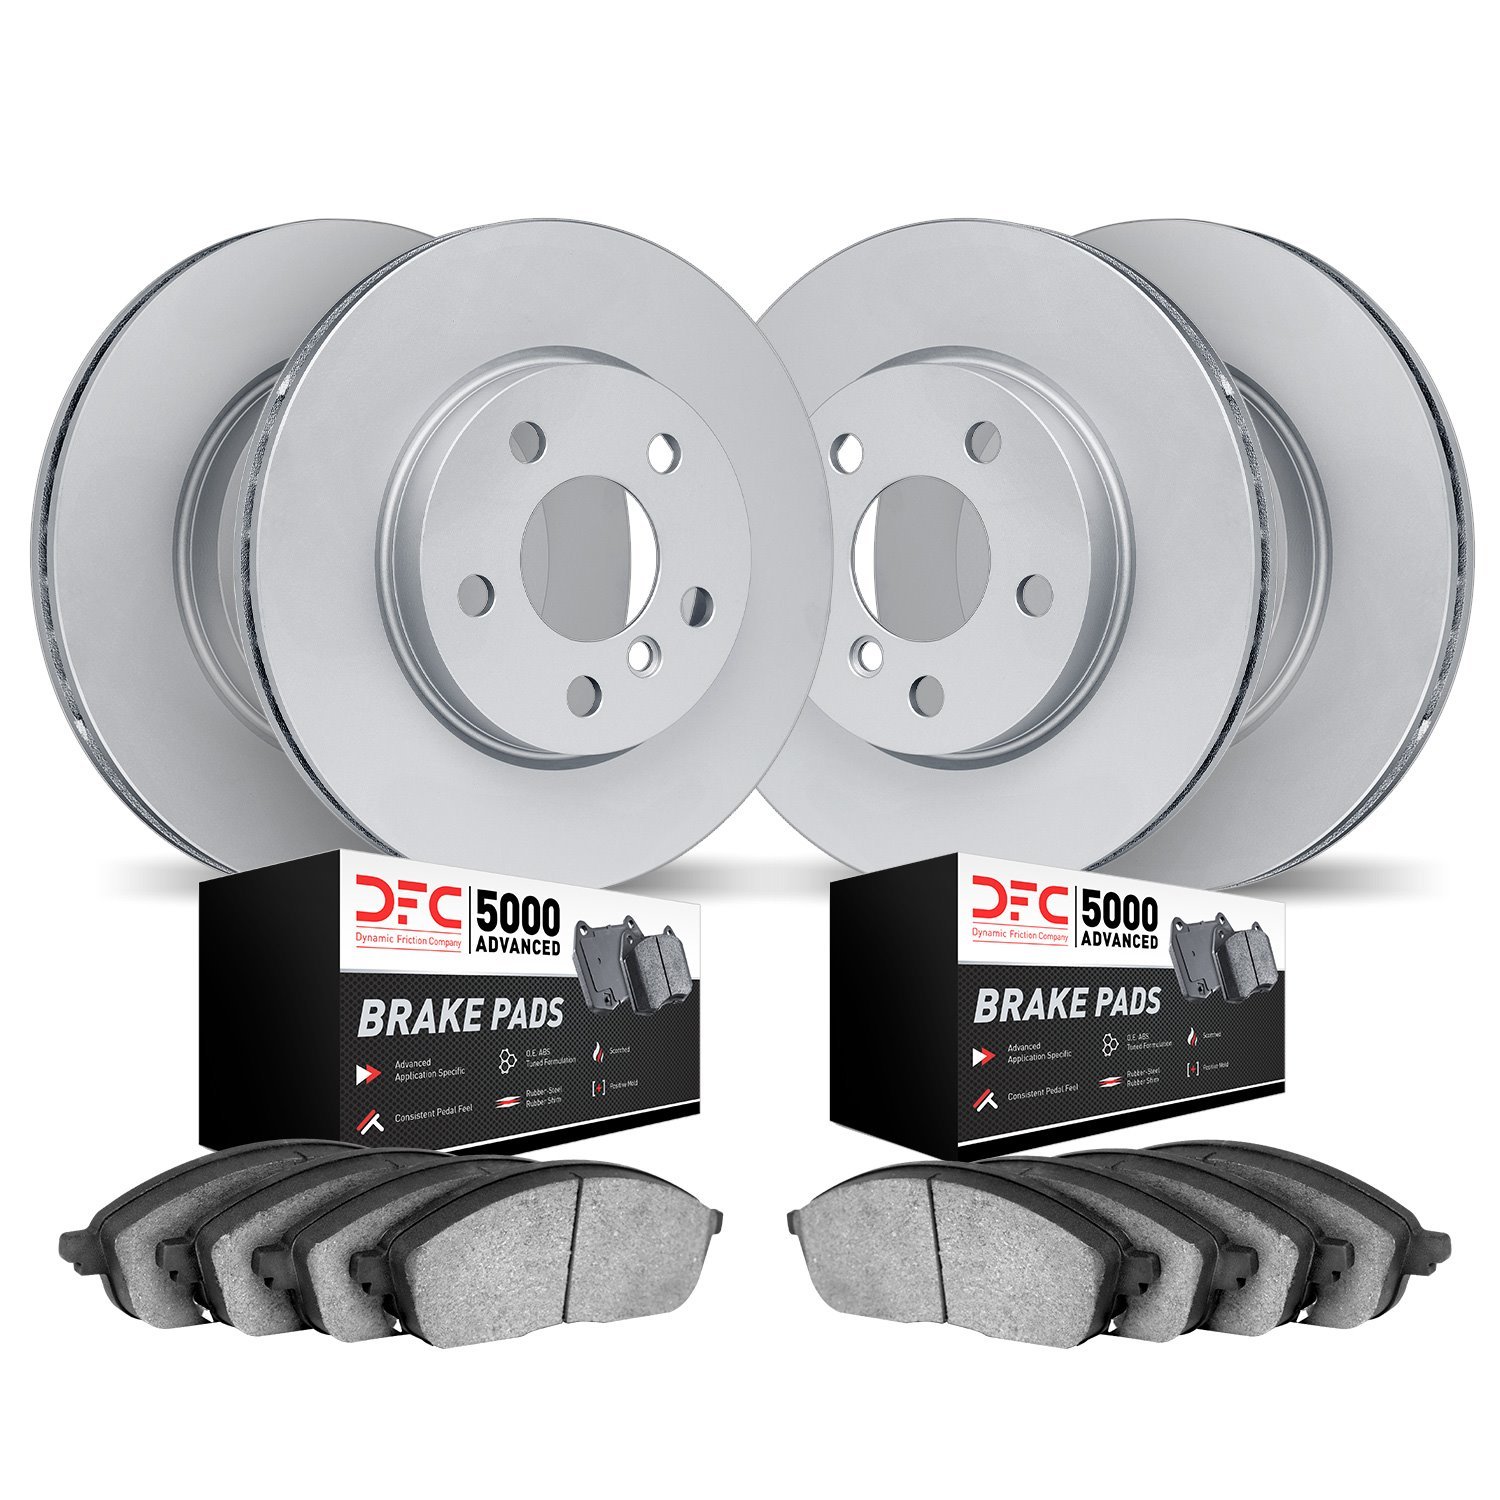 9504-73098 GEOMET Brake Rotors w/5000 Advanced Brake Pads Kit, Fits Select Audi/Volkswagen, Position: Front and Rear